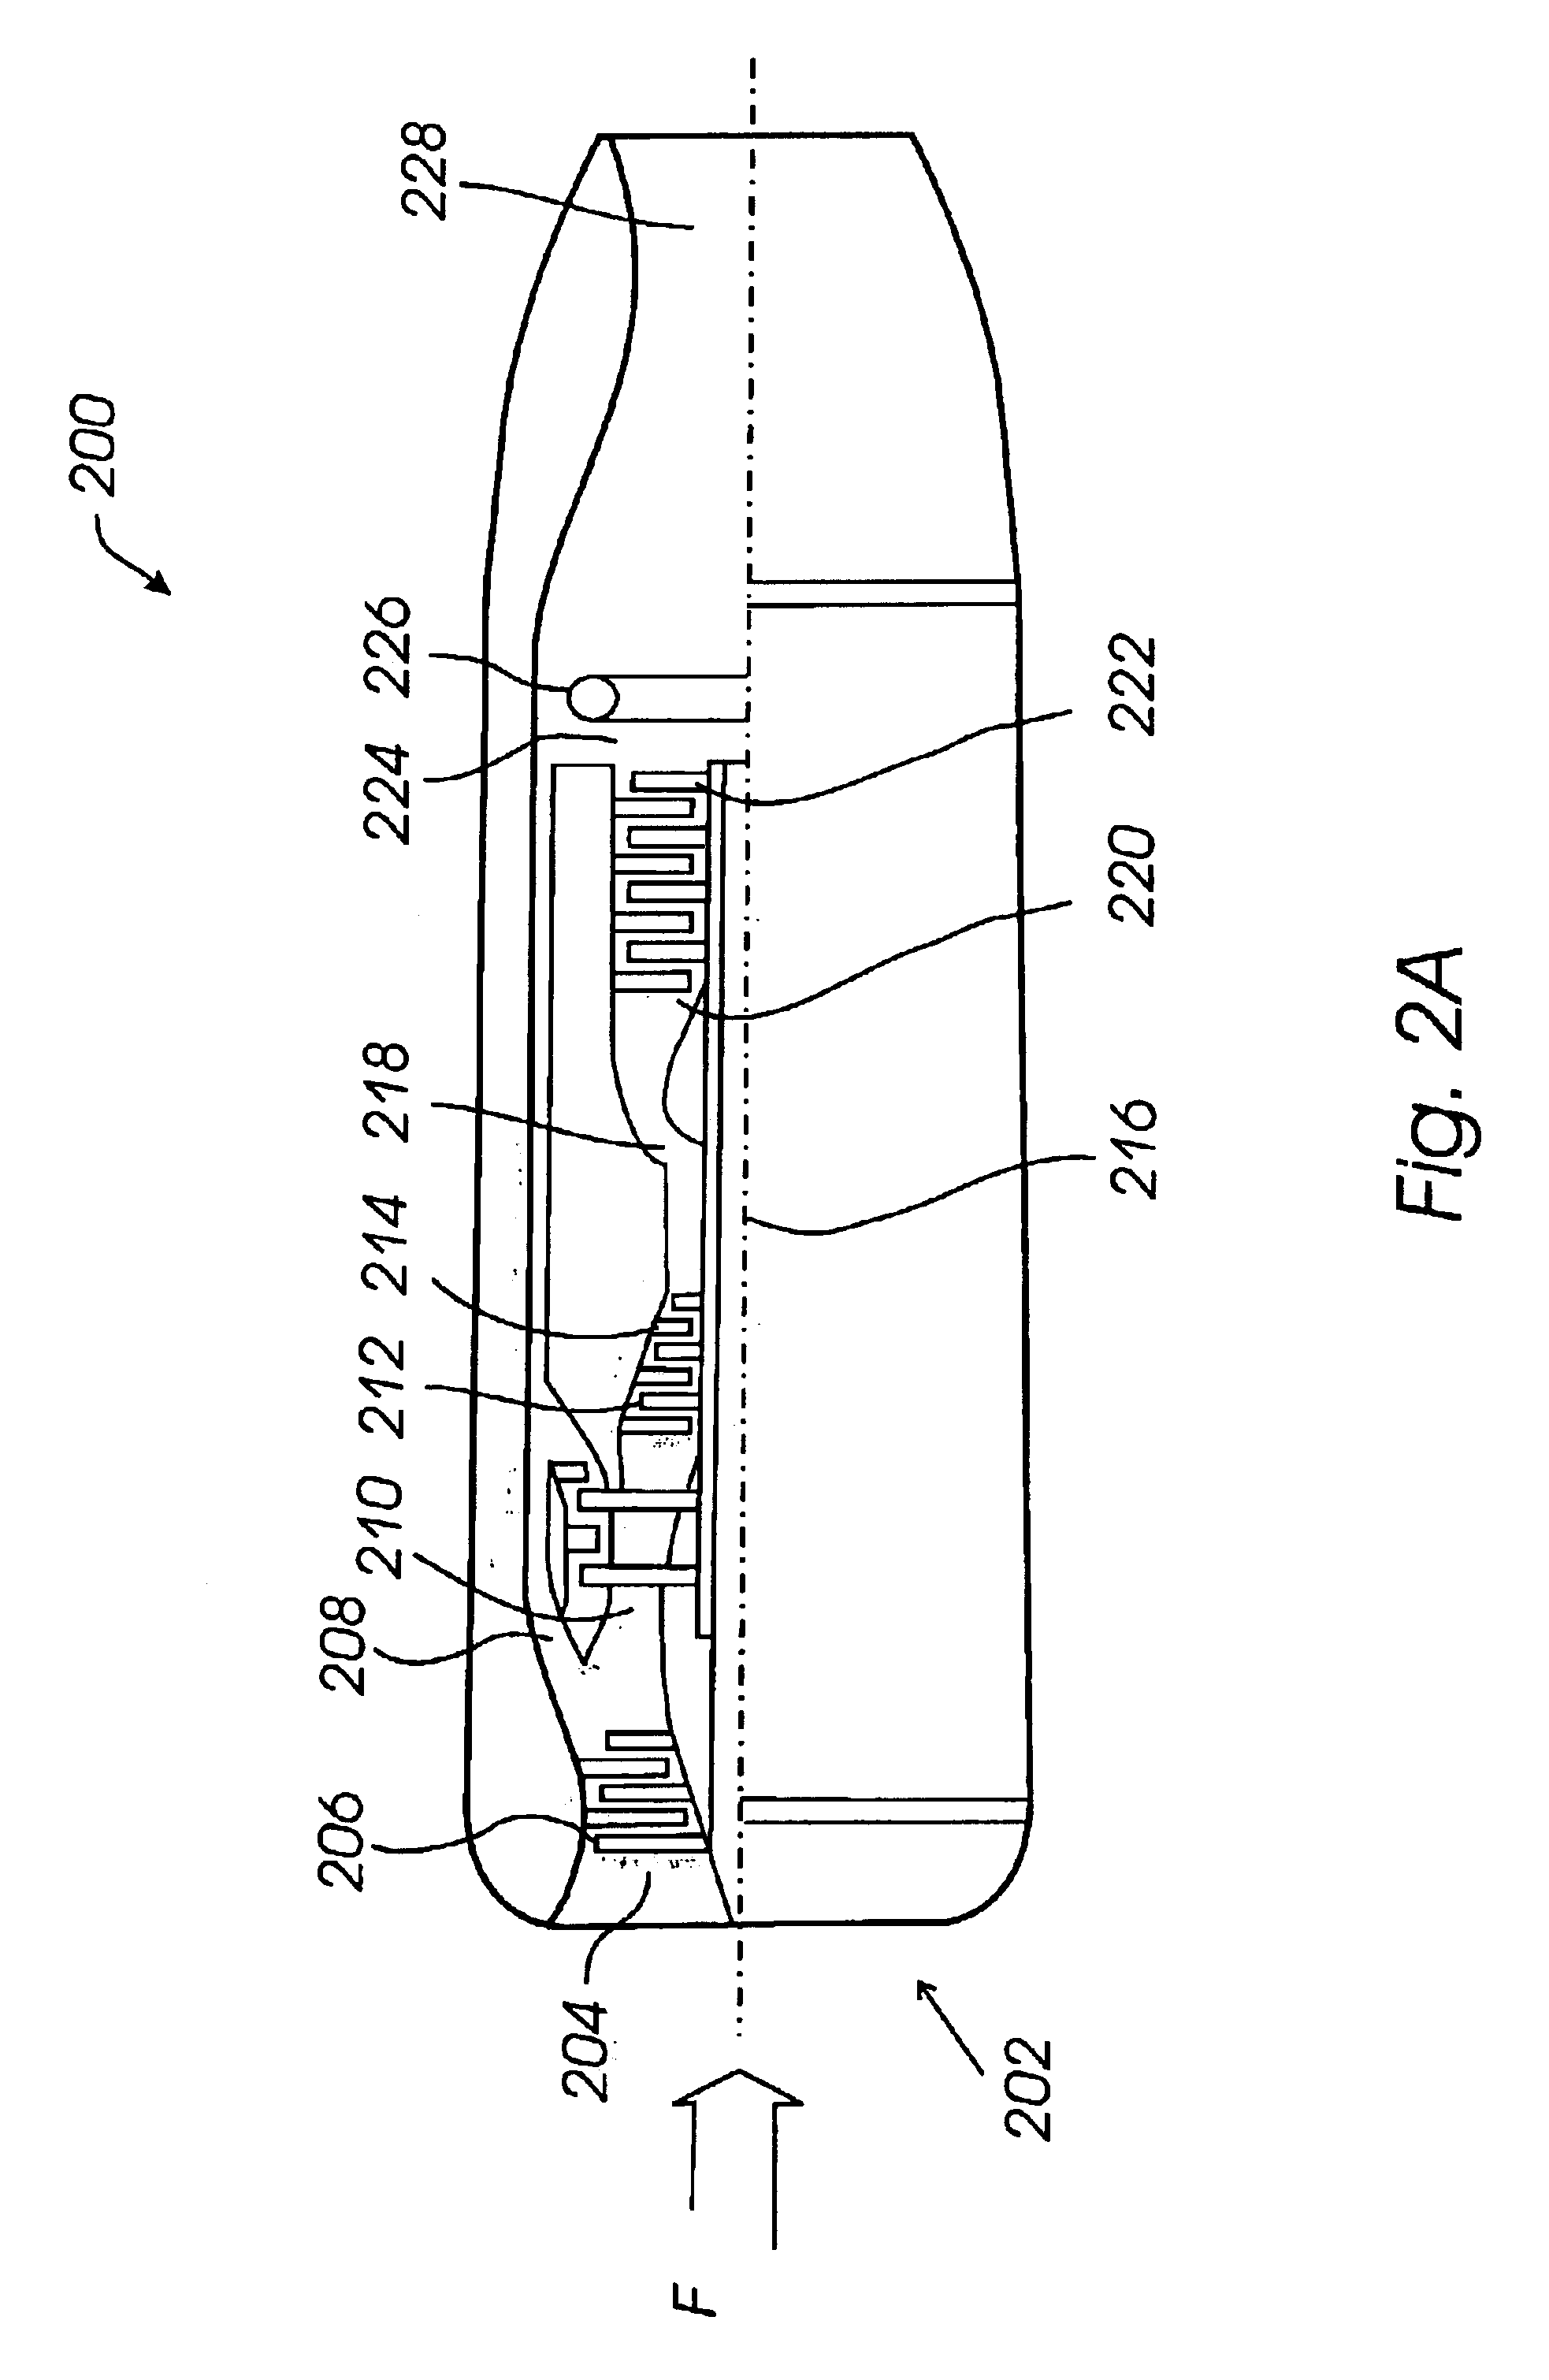 Apparatus and method for inspecting and marking repair areas on a blade